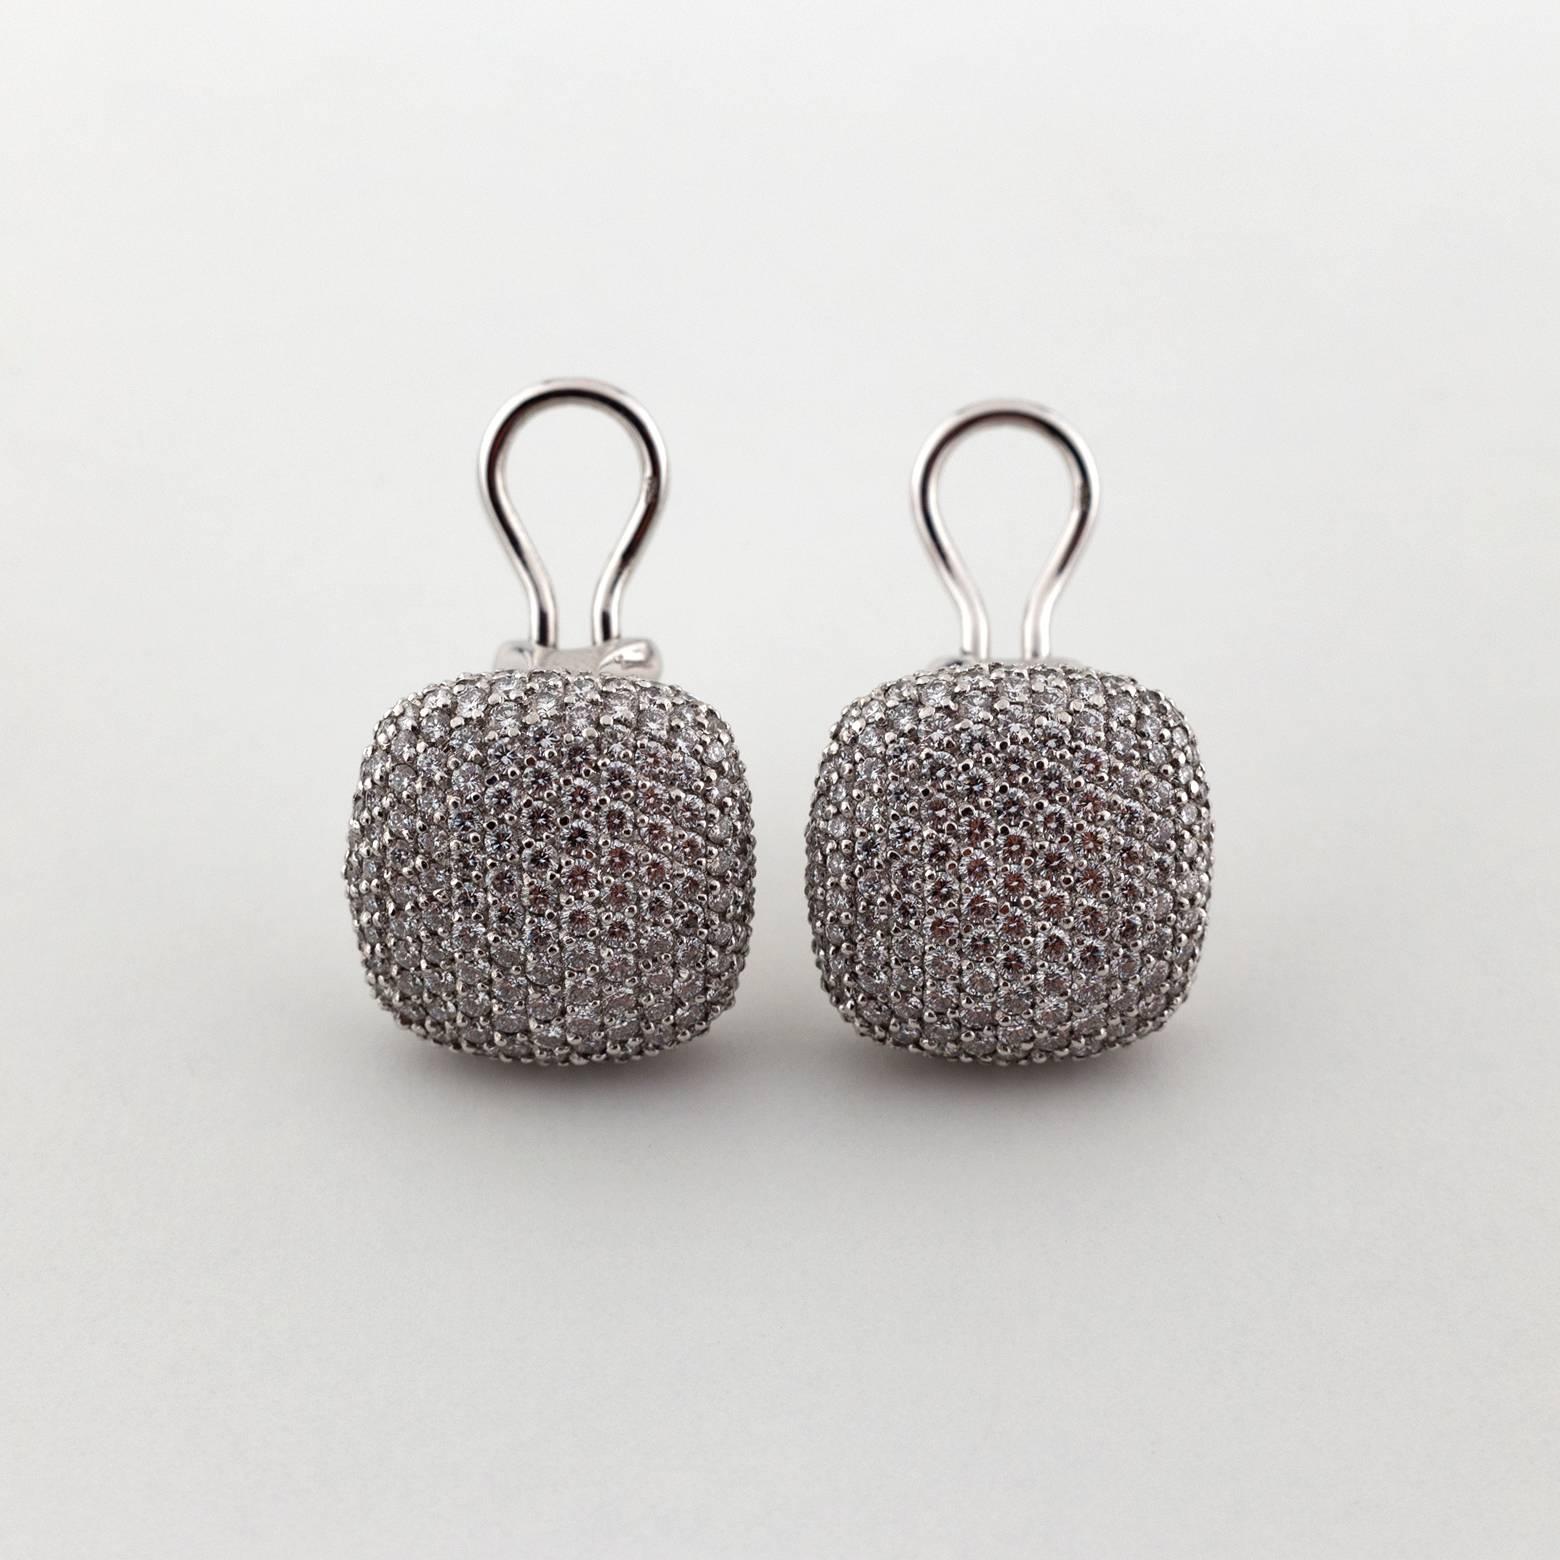 These stud earrings shine from across the room dazzling with 3.58 tw diamonds! They are stunning and elegant and absolutely amazing!!! A must have!!! You'll want to create events just so you can wear these on a regular basis!